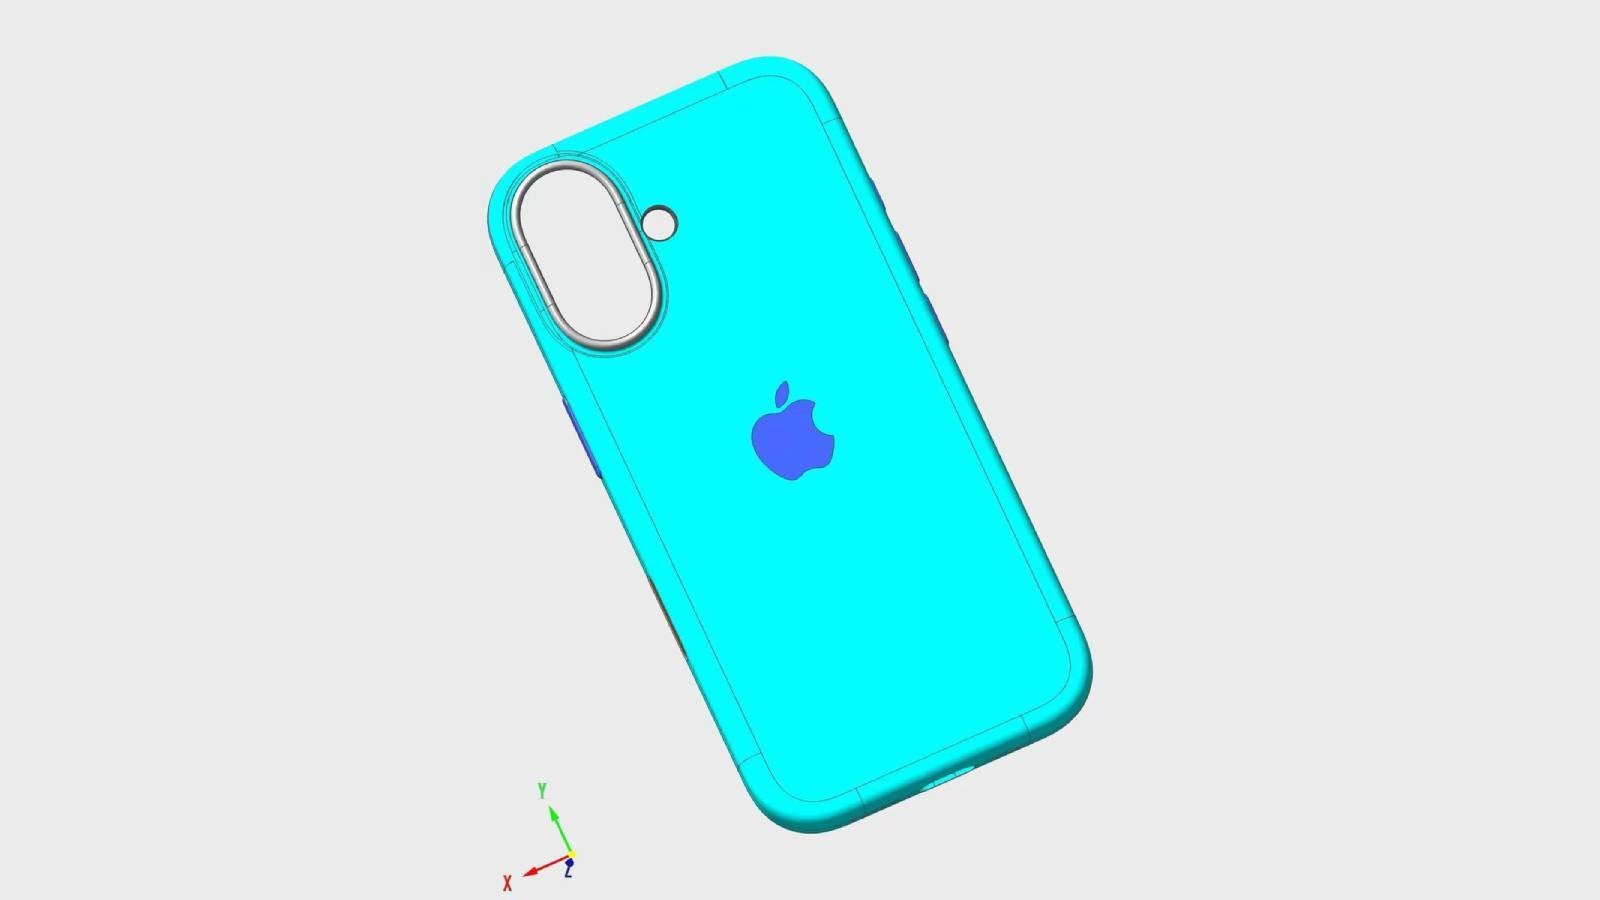 Leaked iPhone 16 CAD image highlights the rumored design changes - Leaked iPhone 16 render showcases slimmer camera island and two new buttons